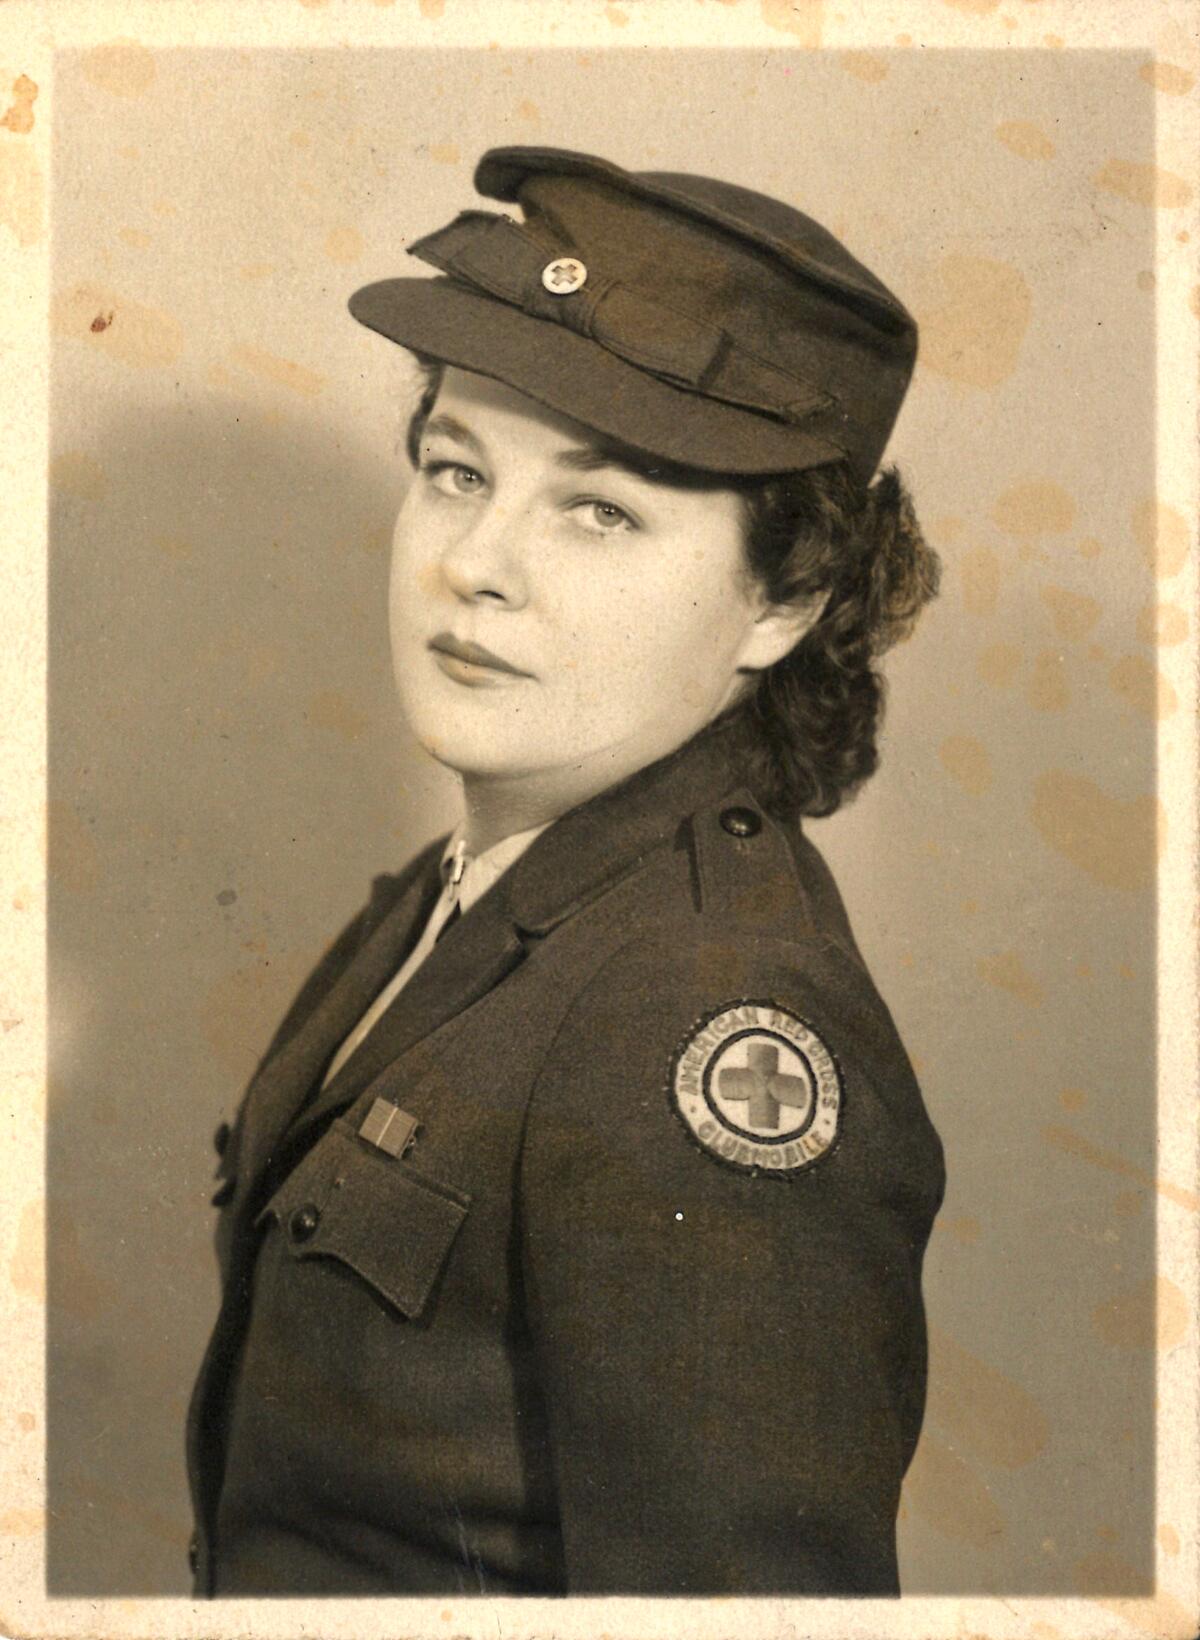 Phyllis McLaughlin de Urrea served as a Red Cross volunteer with the "Donut Dollies."